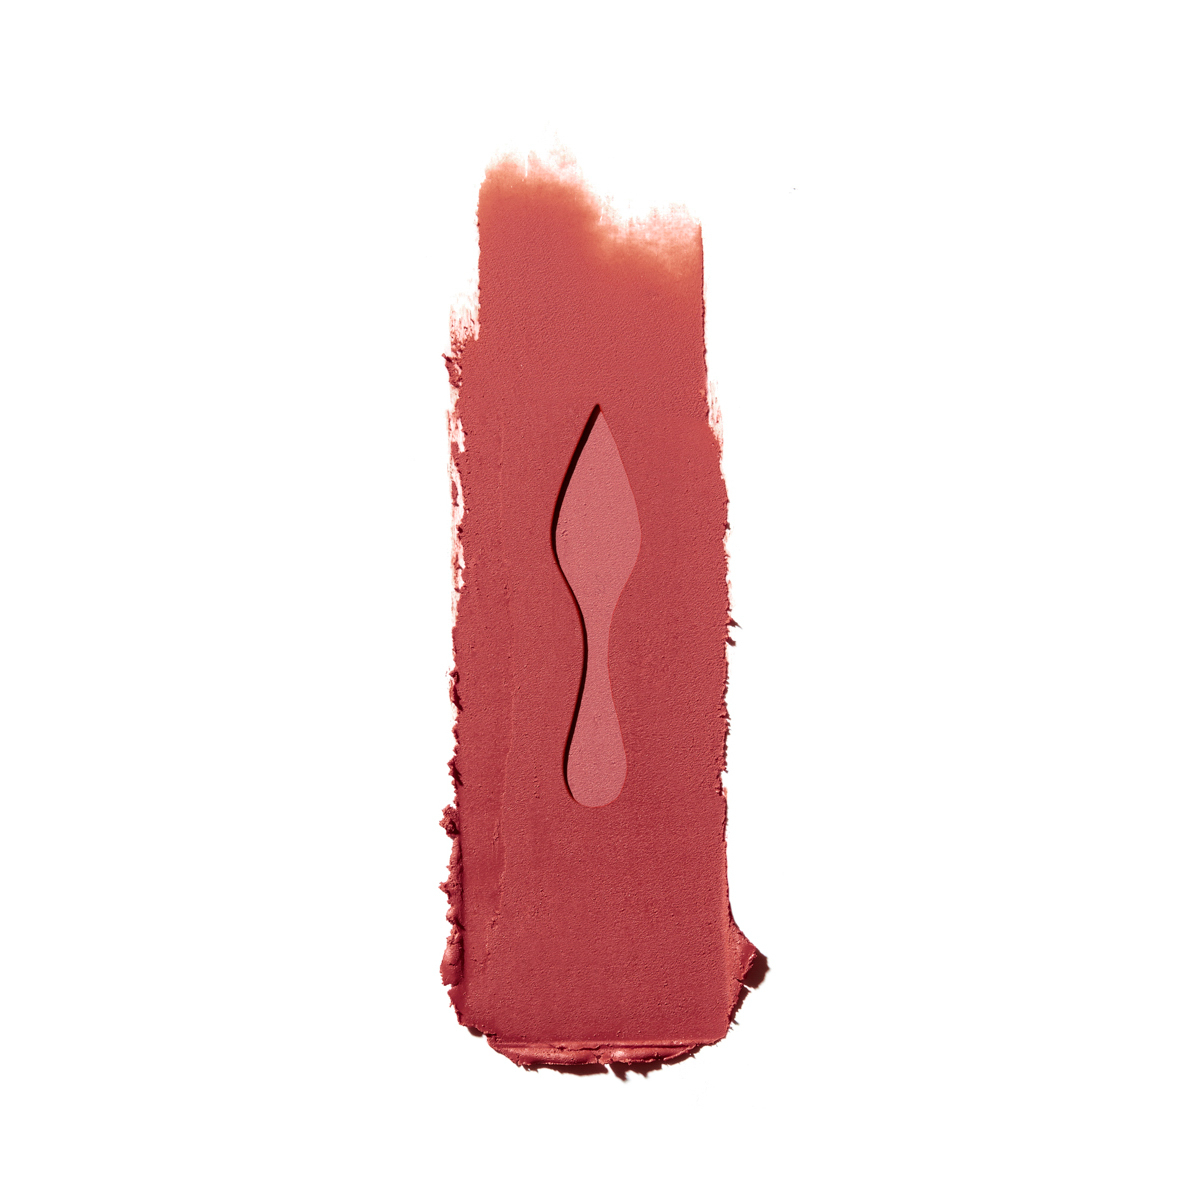 Christian Louboutin Lip Color: My Three Choices + 3 Other Beauty